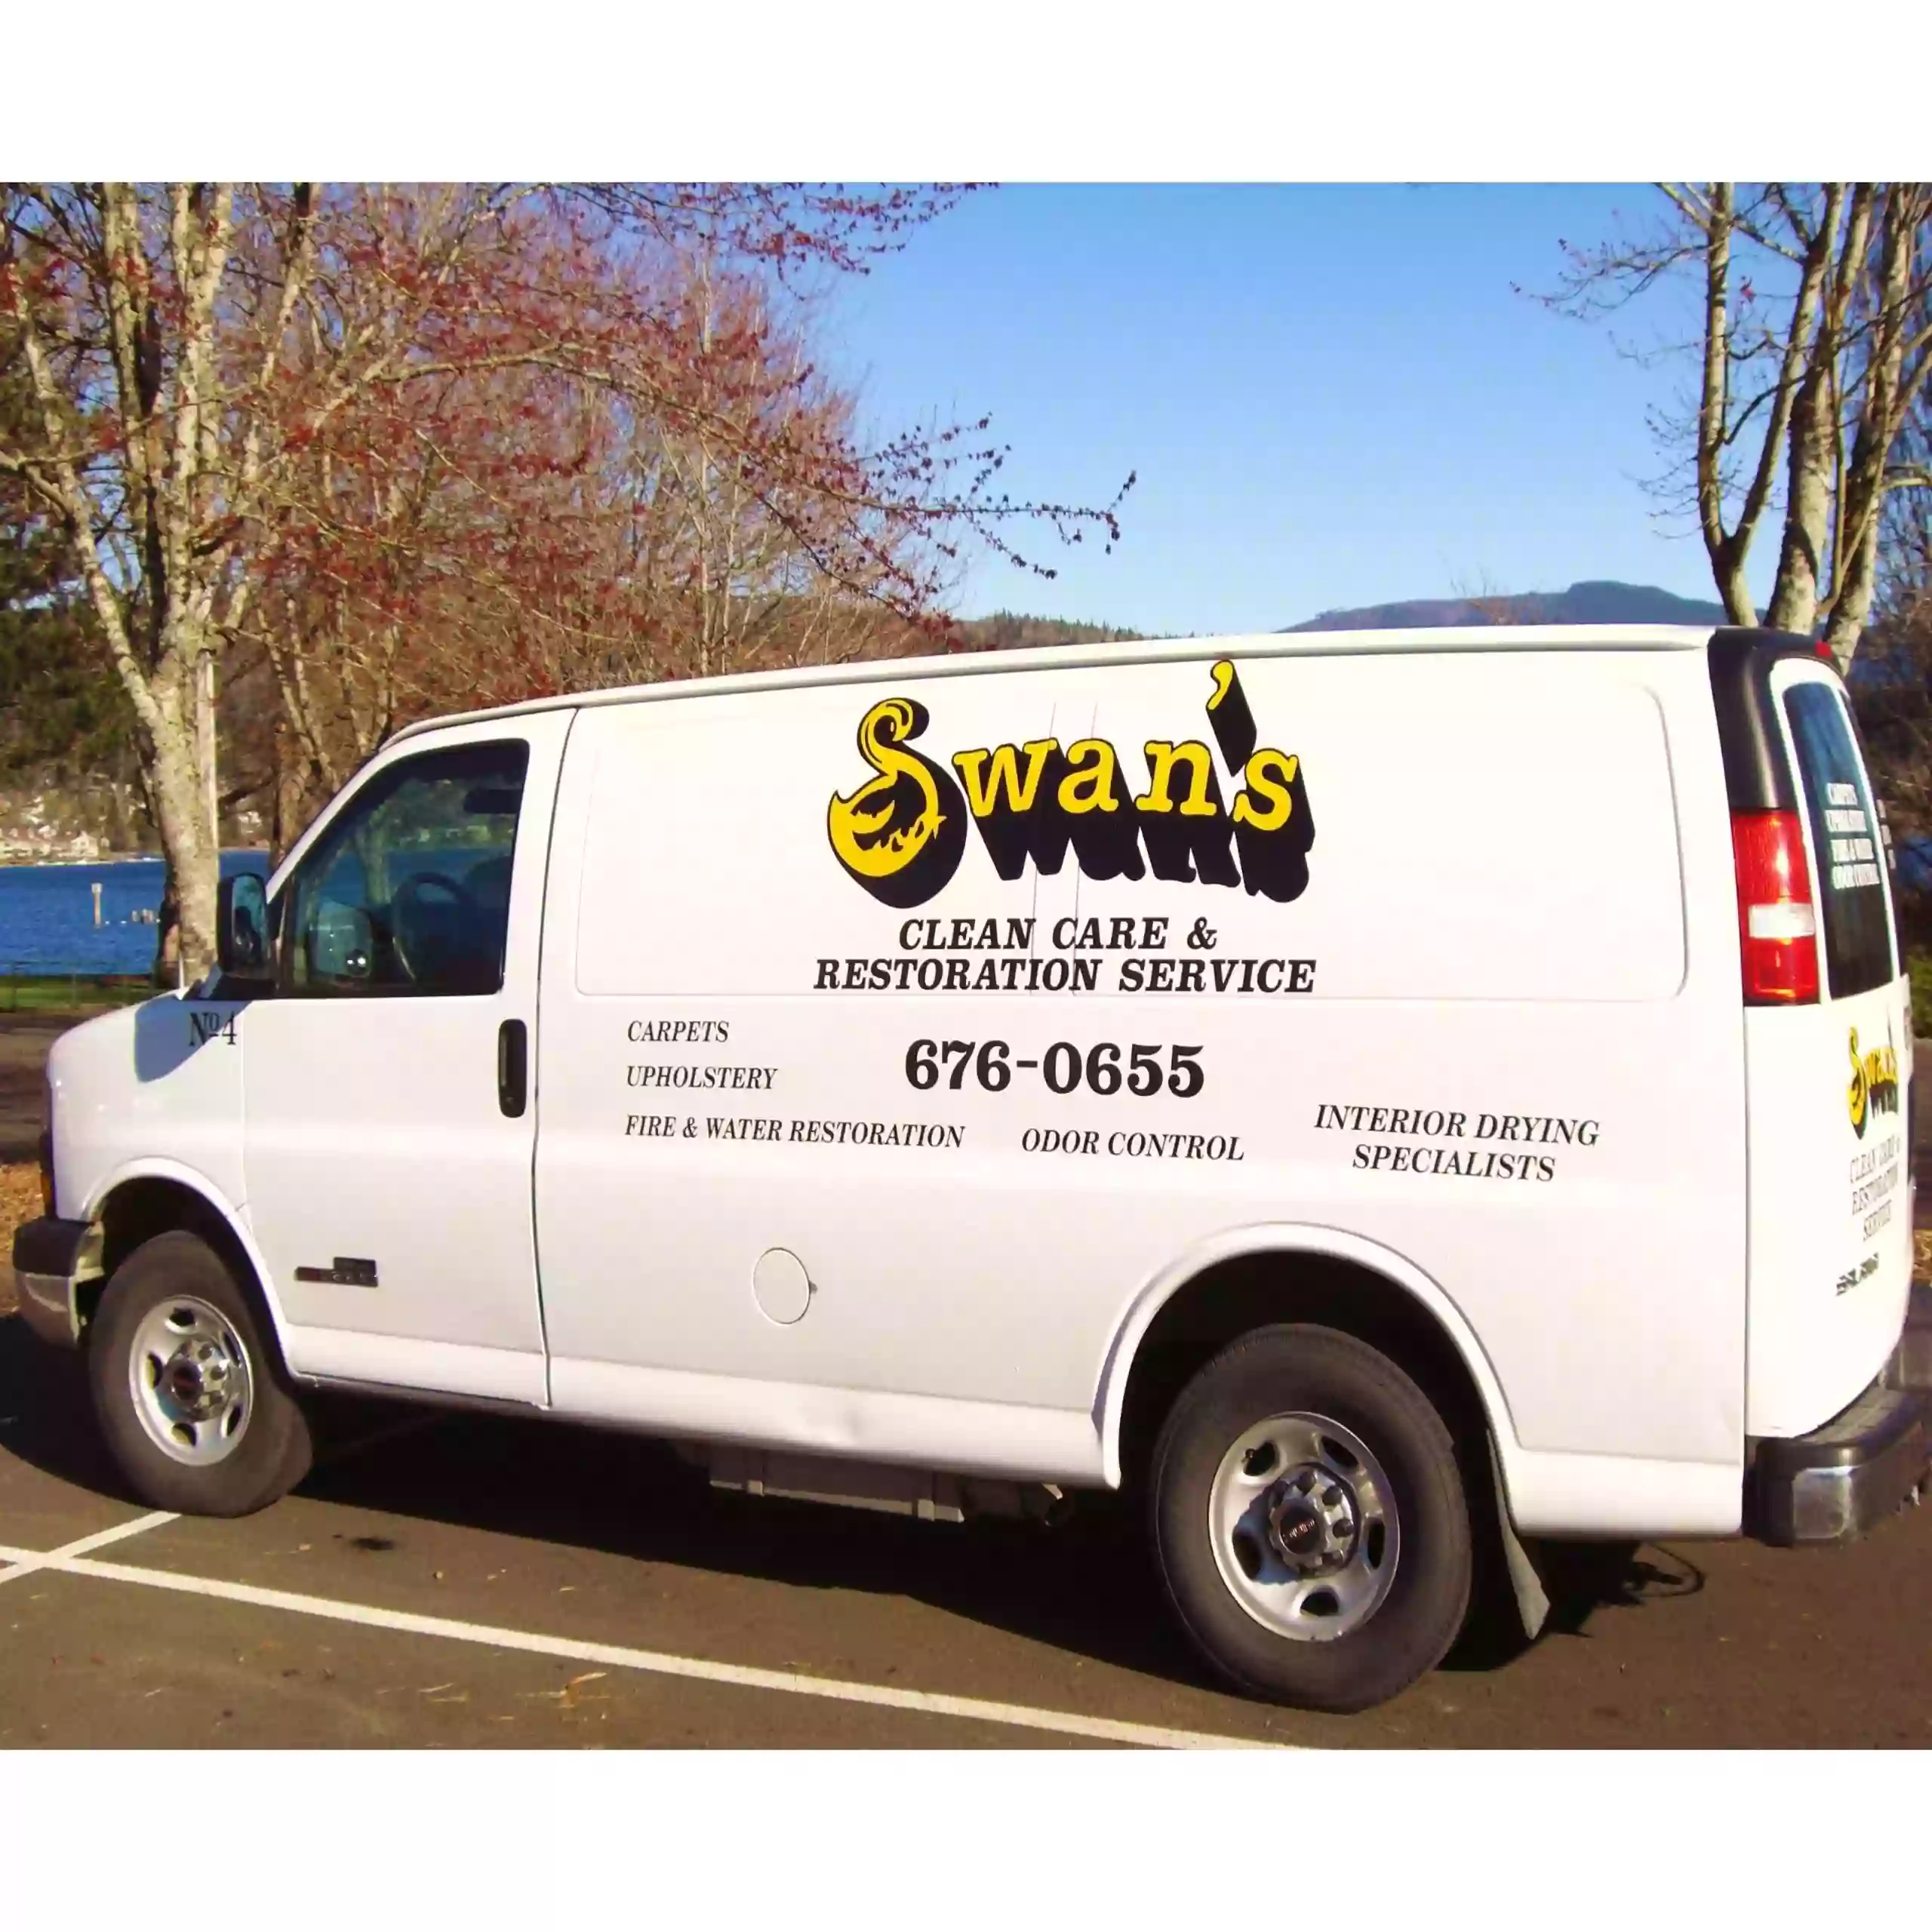 Swan's Carpet Cleaning